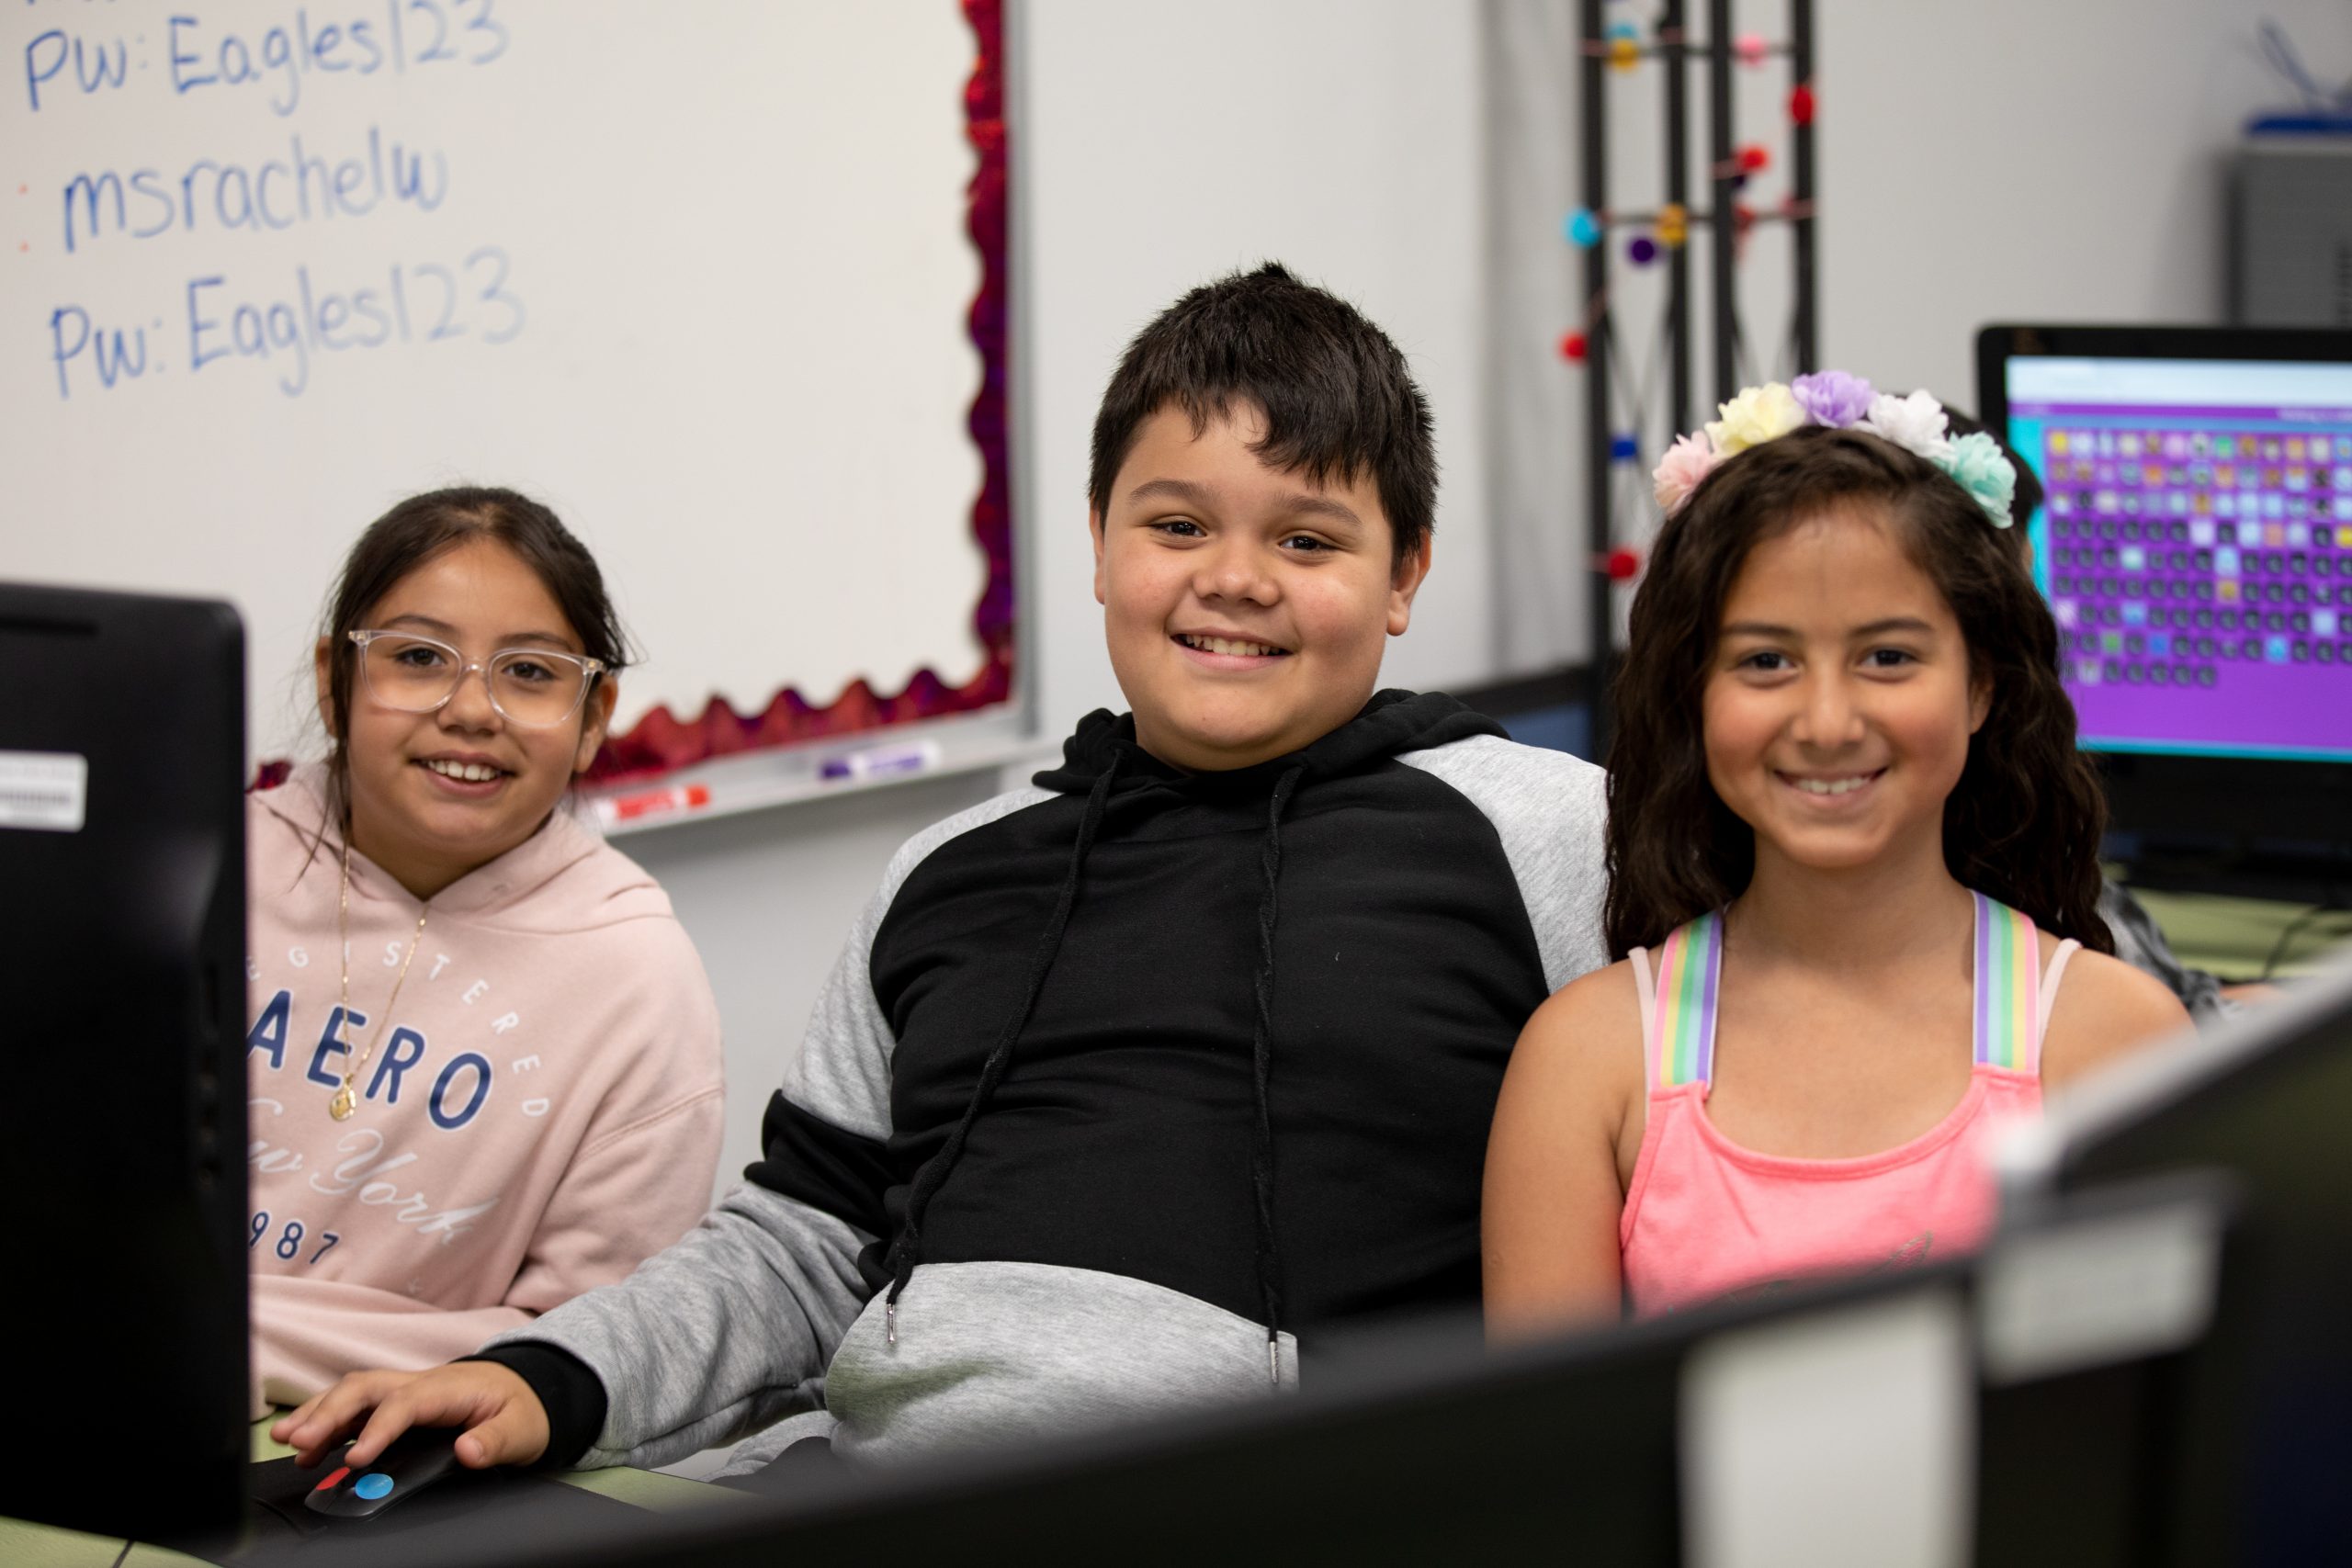 Students smiling while sitting around computer